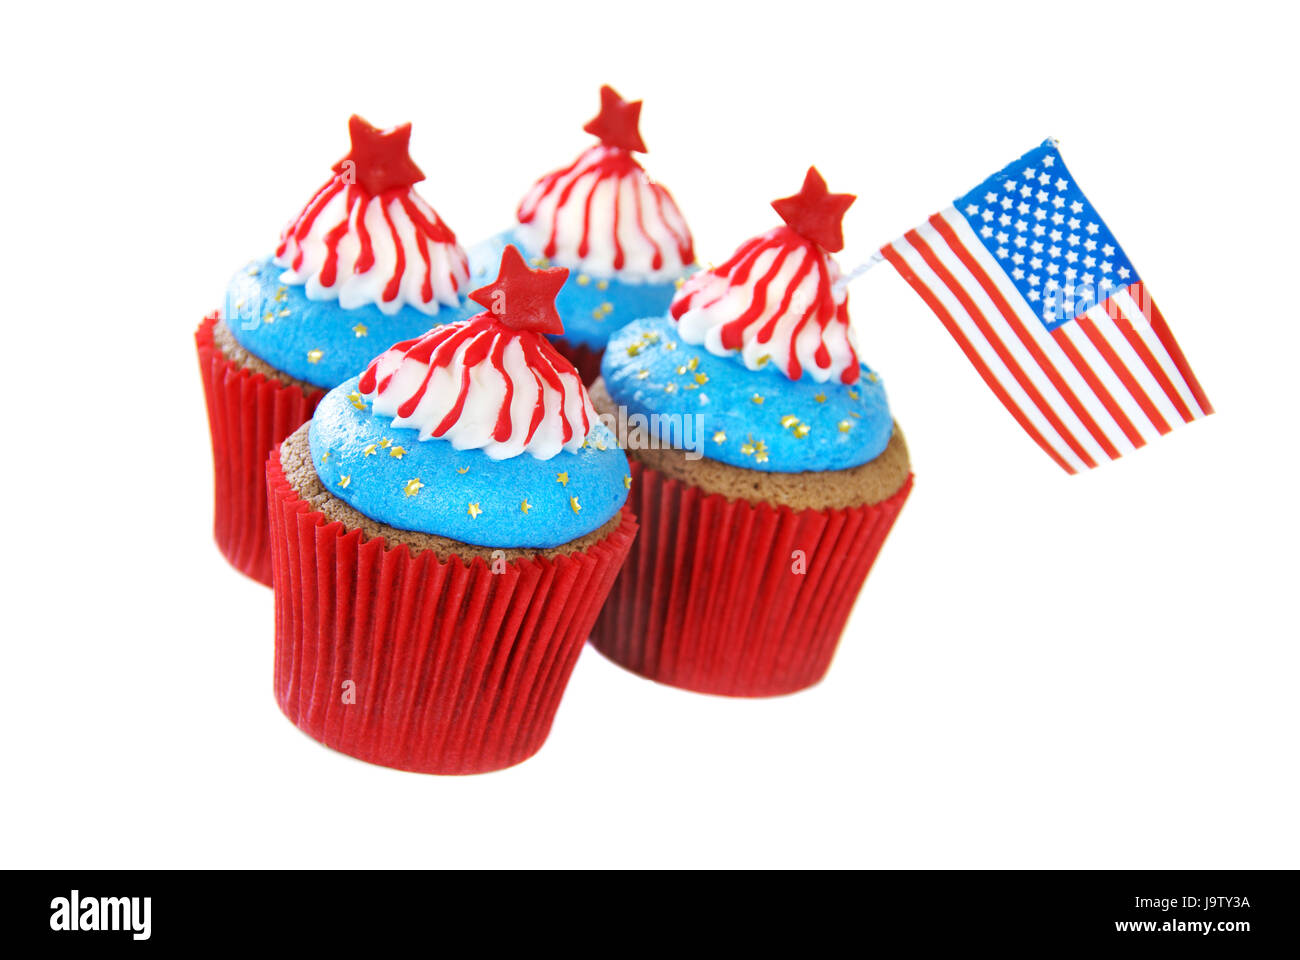 american, america, flag, july, patriotic, independence day, cupcakes, blue, Stock Photo